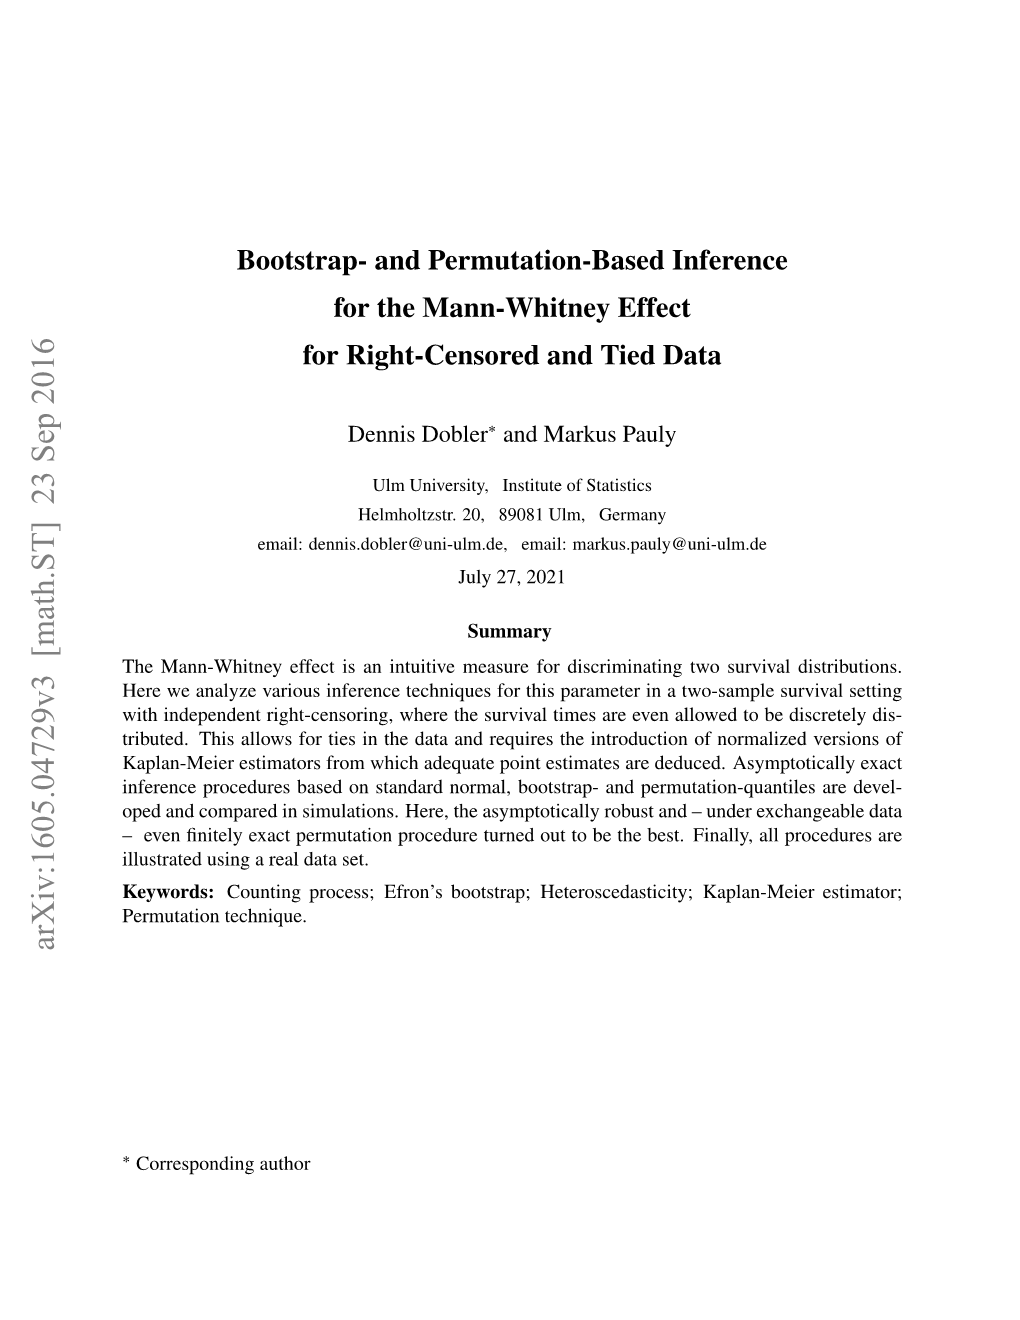 And Permutation-Based Inference for the Mann-Whitney Effect for Right-Censored and Tied Data